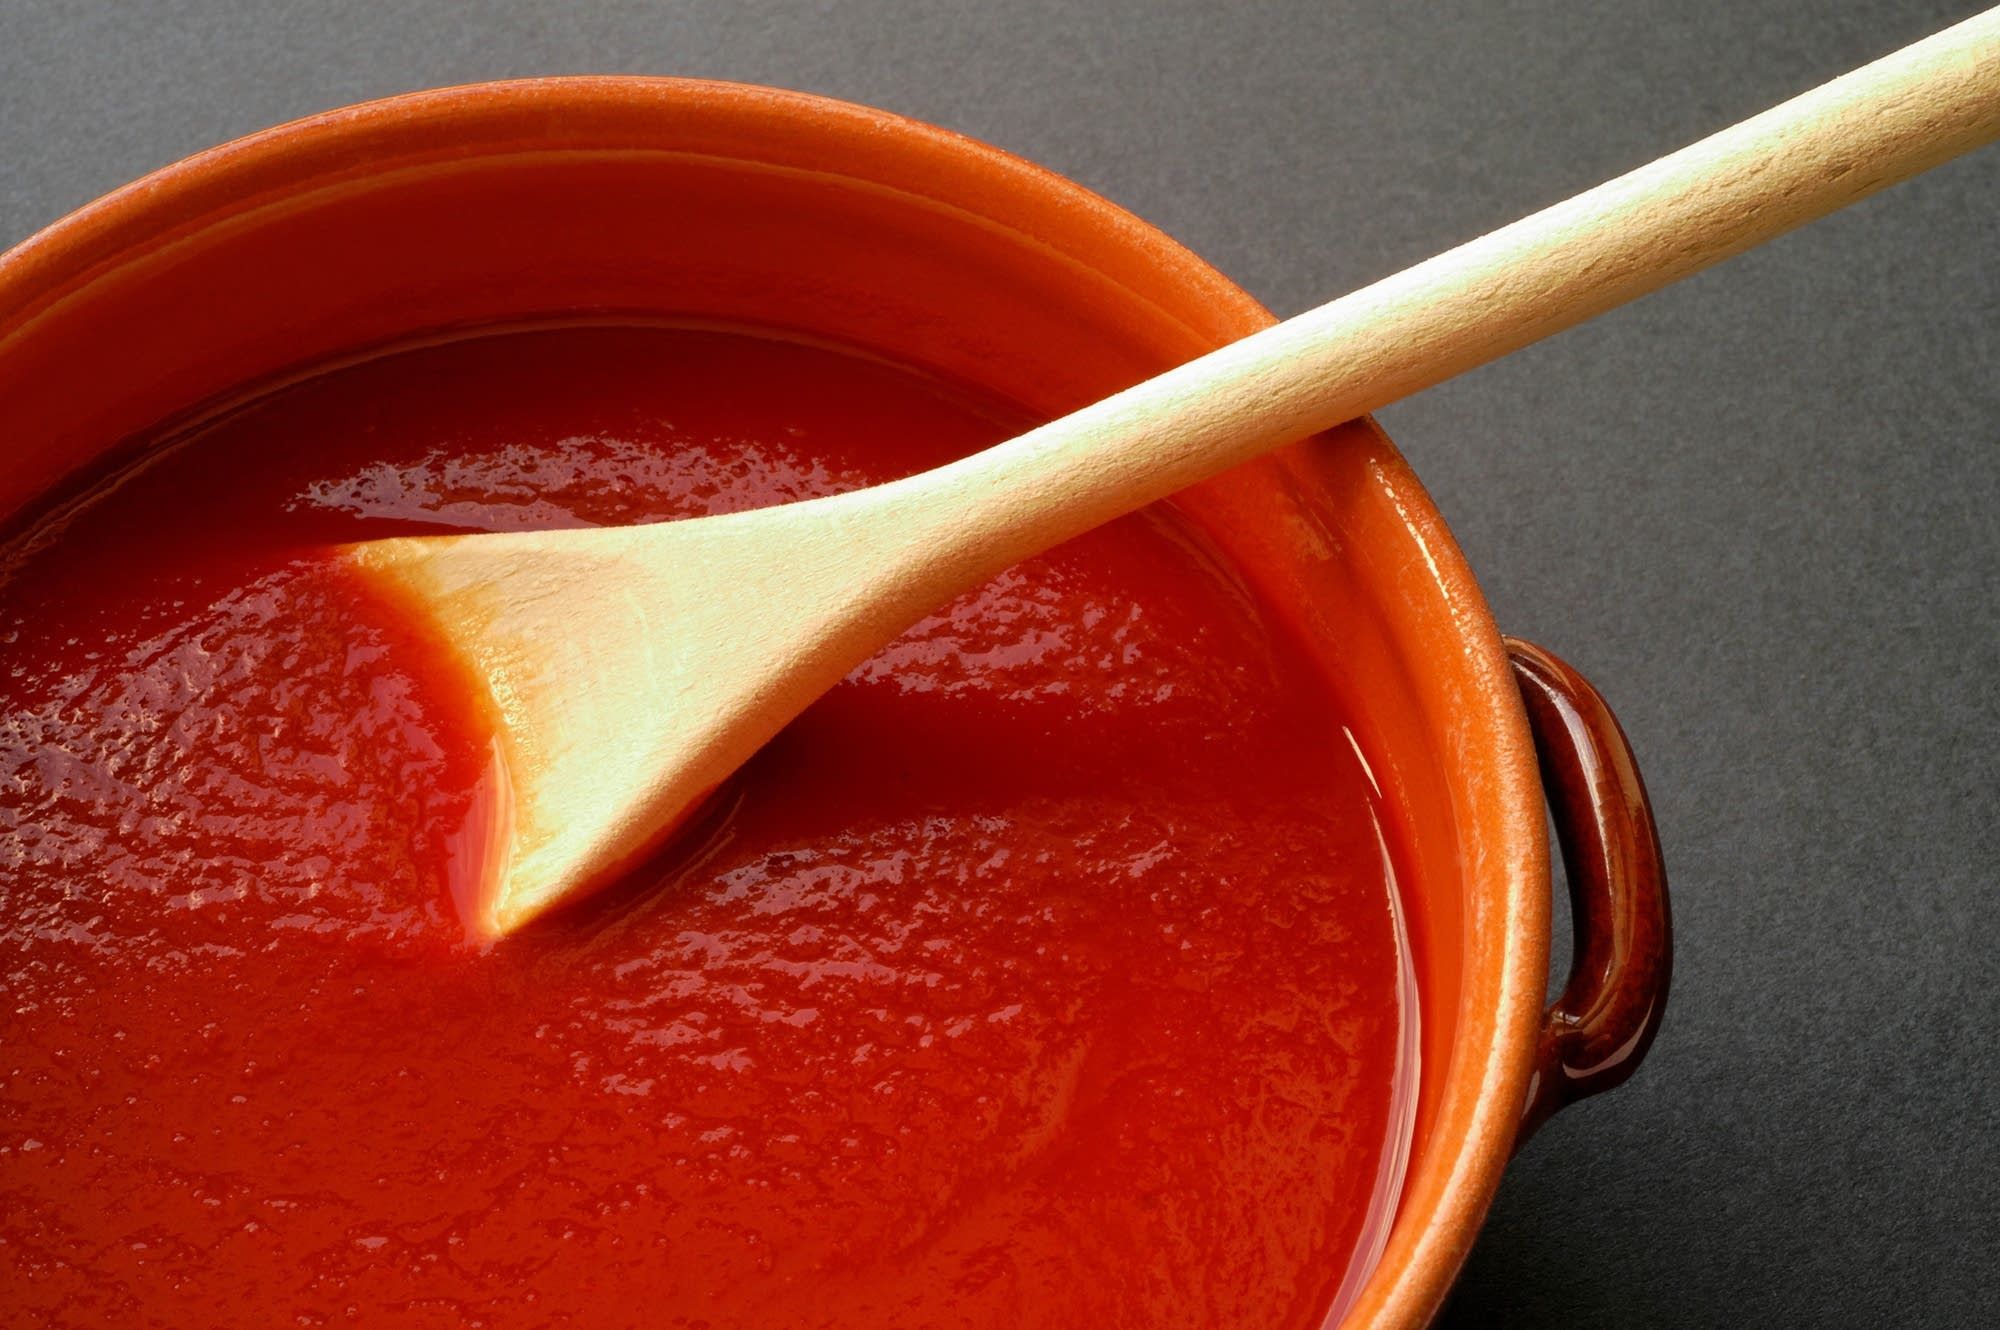 How To Remove Seeds From Tomato Sauce